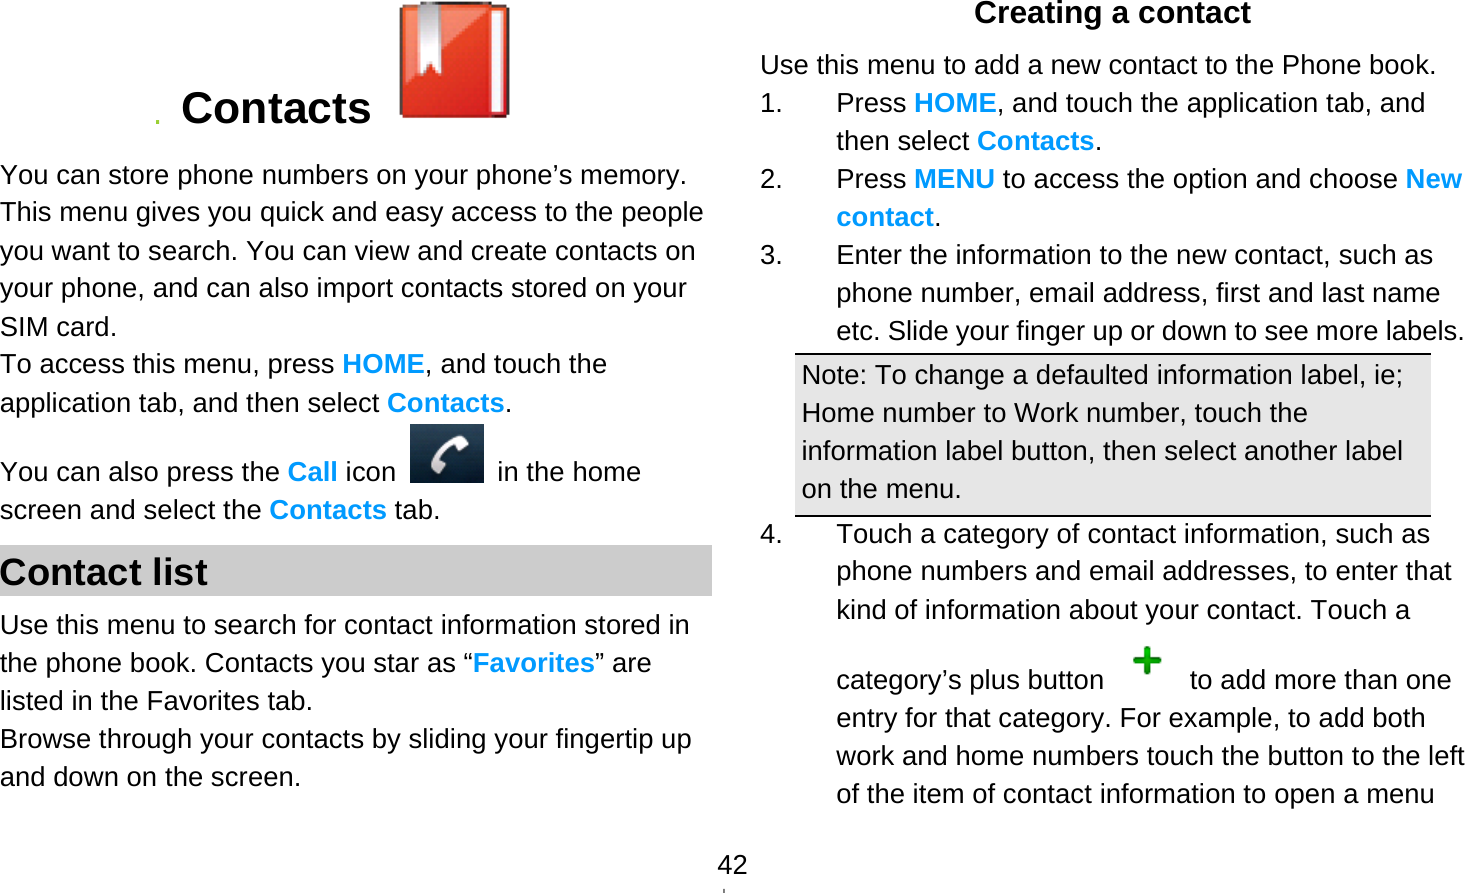   42 Contacts   You can store phone numbers on your phone’s memory. This menu gives you quick and easy access to the people you want to search. You can view and create contacts on your phone, and can also import contacts stored on your SIM card. To access this menu, press HOME, and touch the application tab, and then select Contacts.  You can also press the Call icon   in the home screen and select the Contacts tab. Contact list Use this menu to search for contact information stored in the phone book. Contacts you star as “Favorites” are listed in the Favorites tab. Browse through your contacts by sliding your fingertip up and down on the screen.   Creating a contact Use this menu to add a new contact to the Phone book. 1. Press HOME, and touch the application tab, and then select Contacts. 2. Press MENU to access the option and choose New contact. 3.  Enter the information to the new contact, such as phone number, email address, first and last name etc. Slide your finger up or down to see more labels. Note: To change a defaulted information label, ie; Home number to Work number, touch the information label button, then select another label on the menu. 4.  Touch a category of contact information, such as phone numbers and email addresses, to enter that kind of information about your contact. Touch a category’s plus button    to add more than one entry for that category. For example, to add both work and home numbers touch the button to the left of the item of contact information to open a menu 